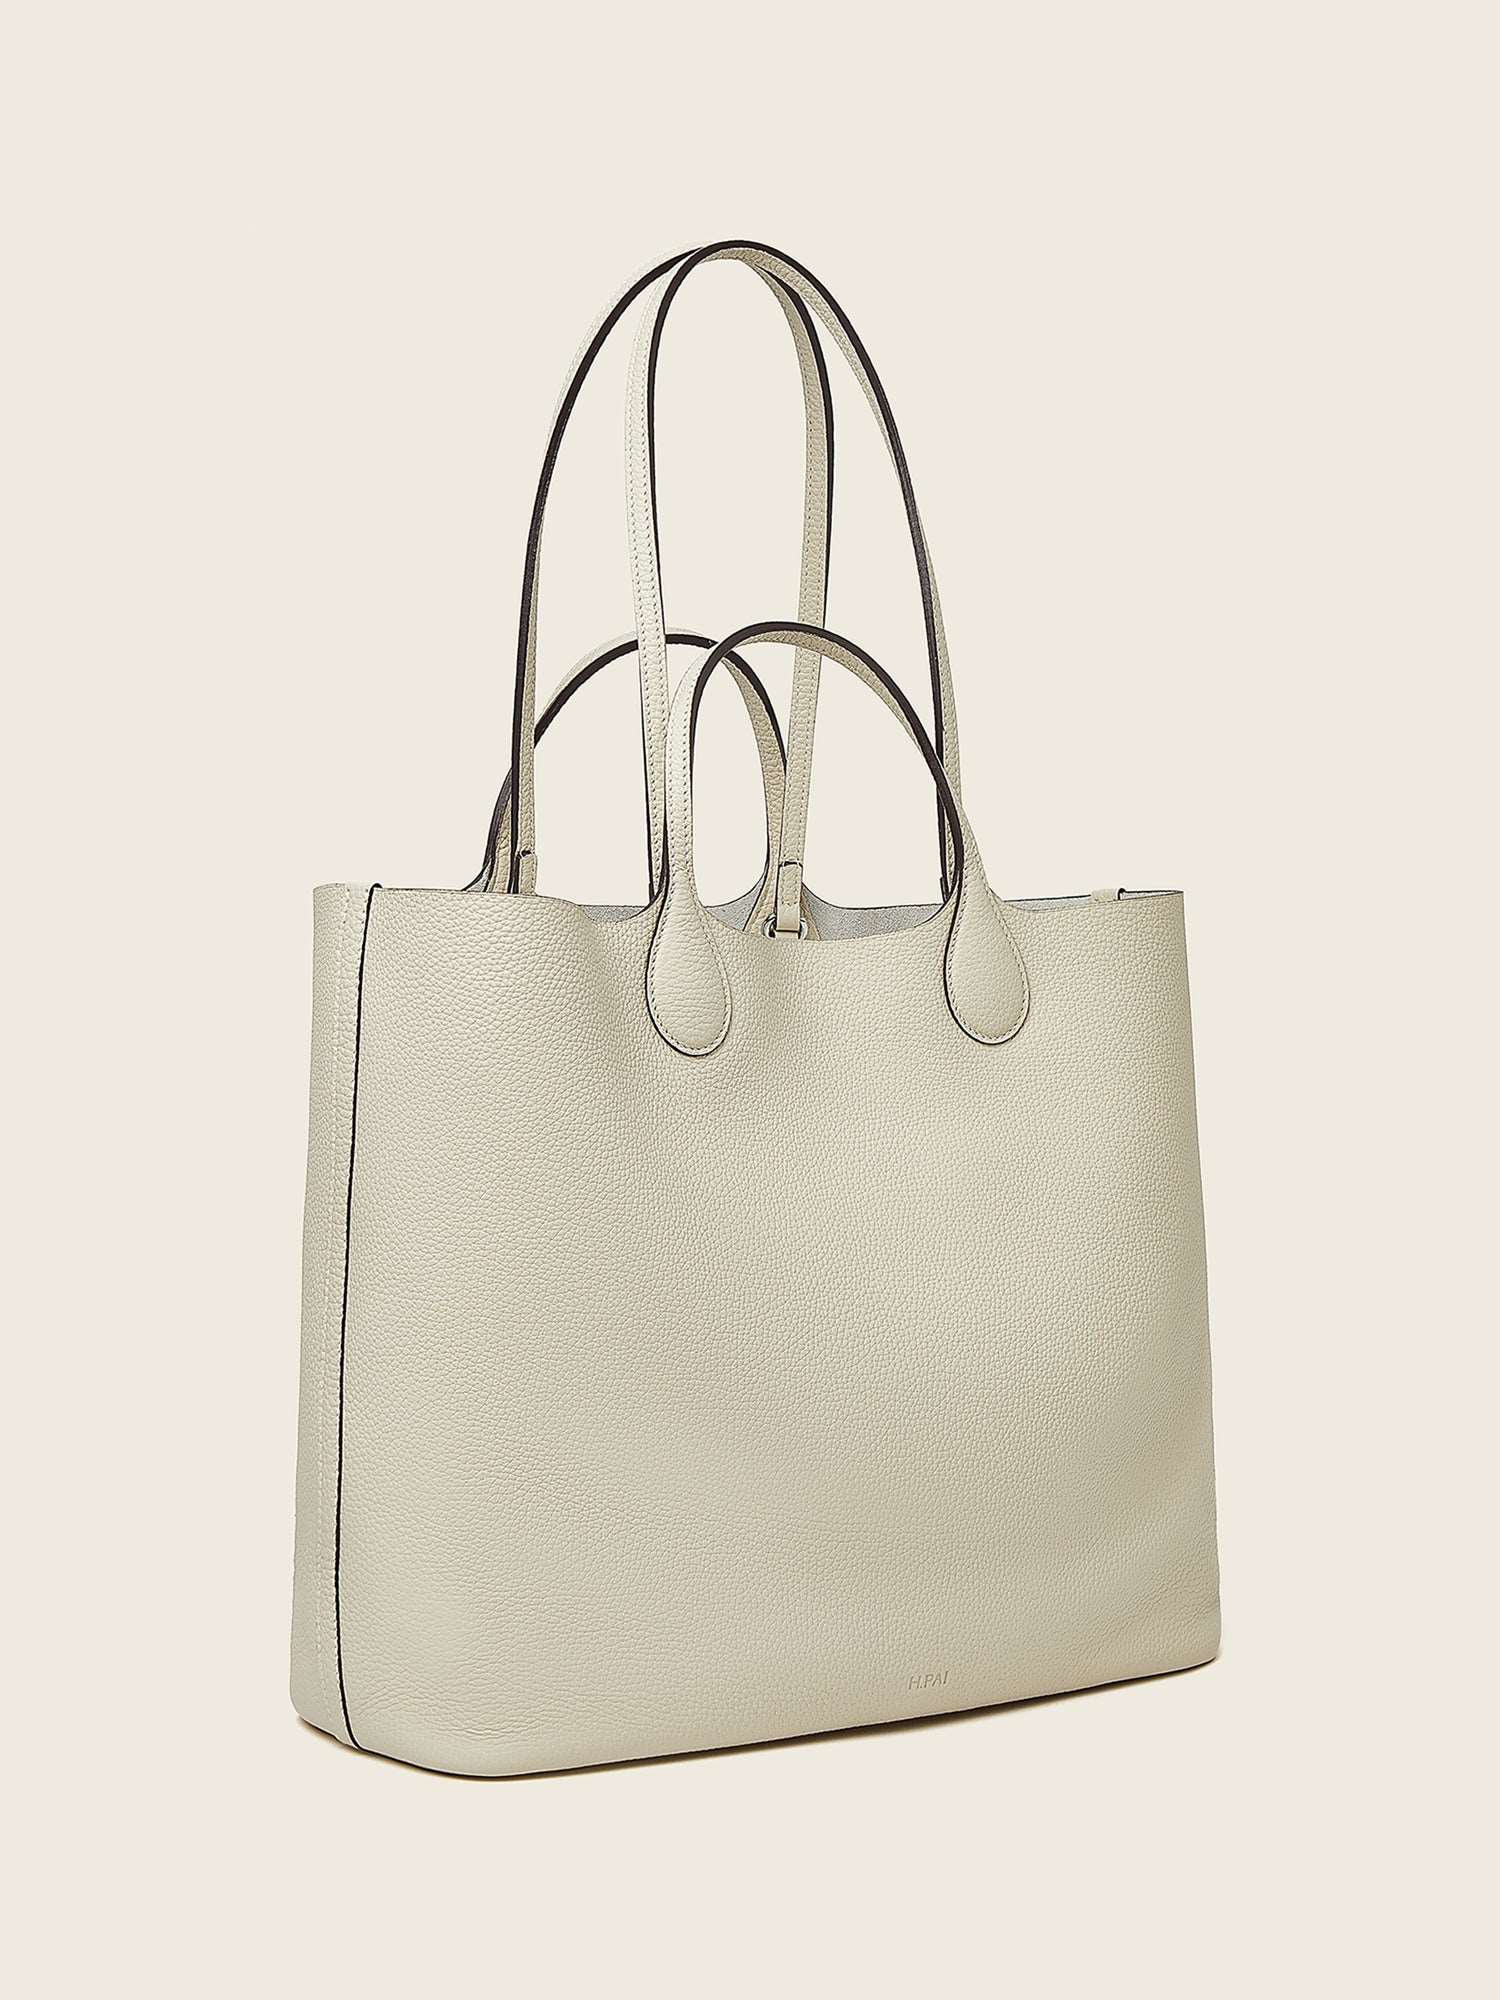 Hpai Large Yesod Tote Bag in Leather - Ivory